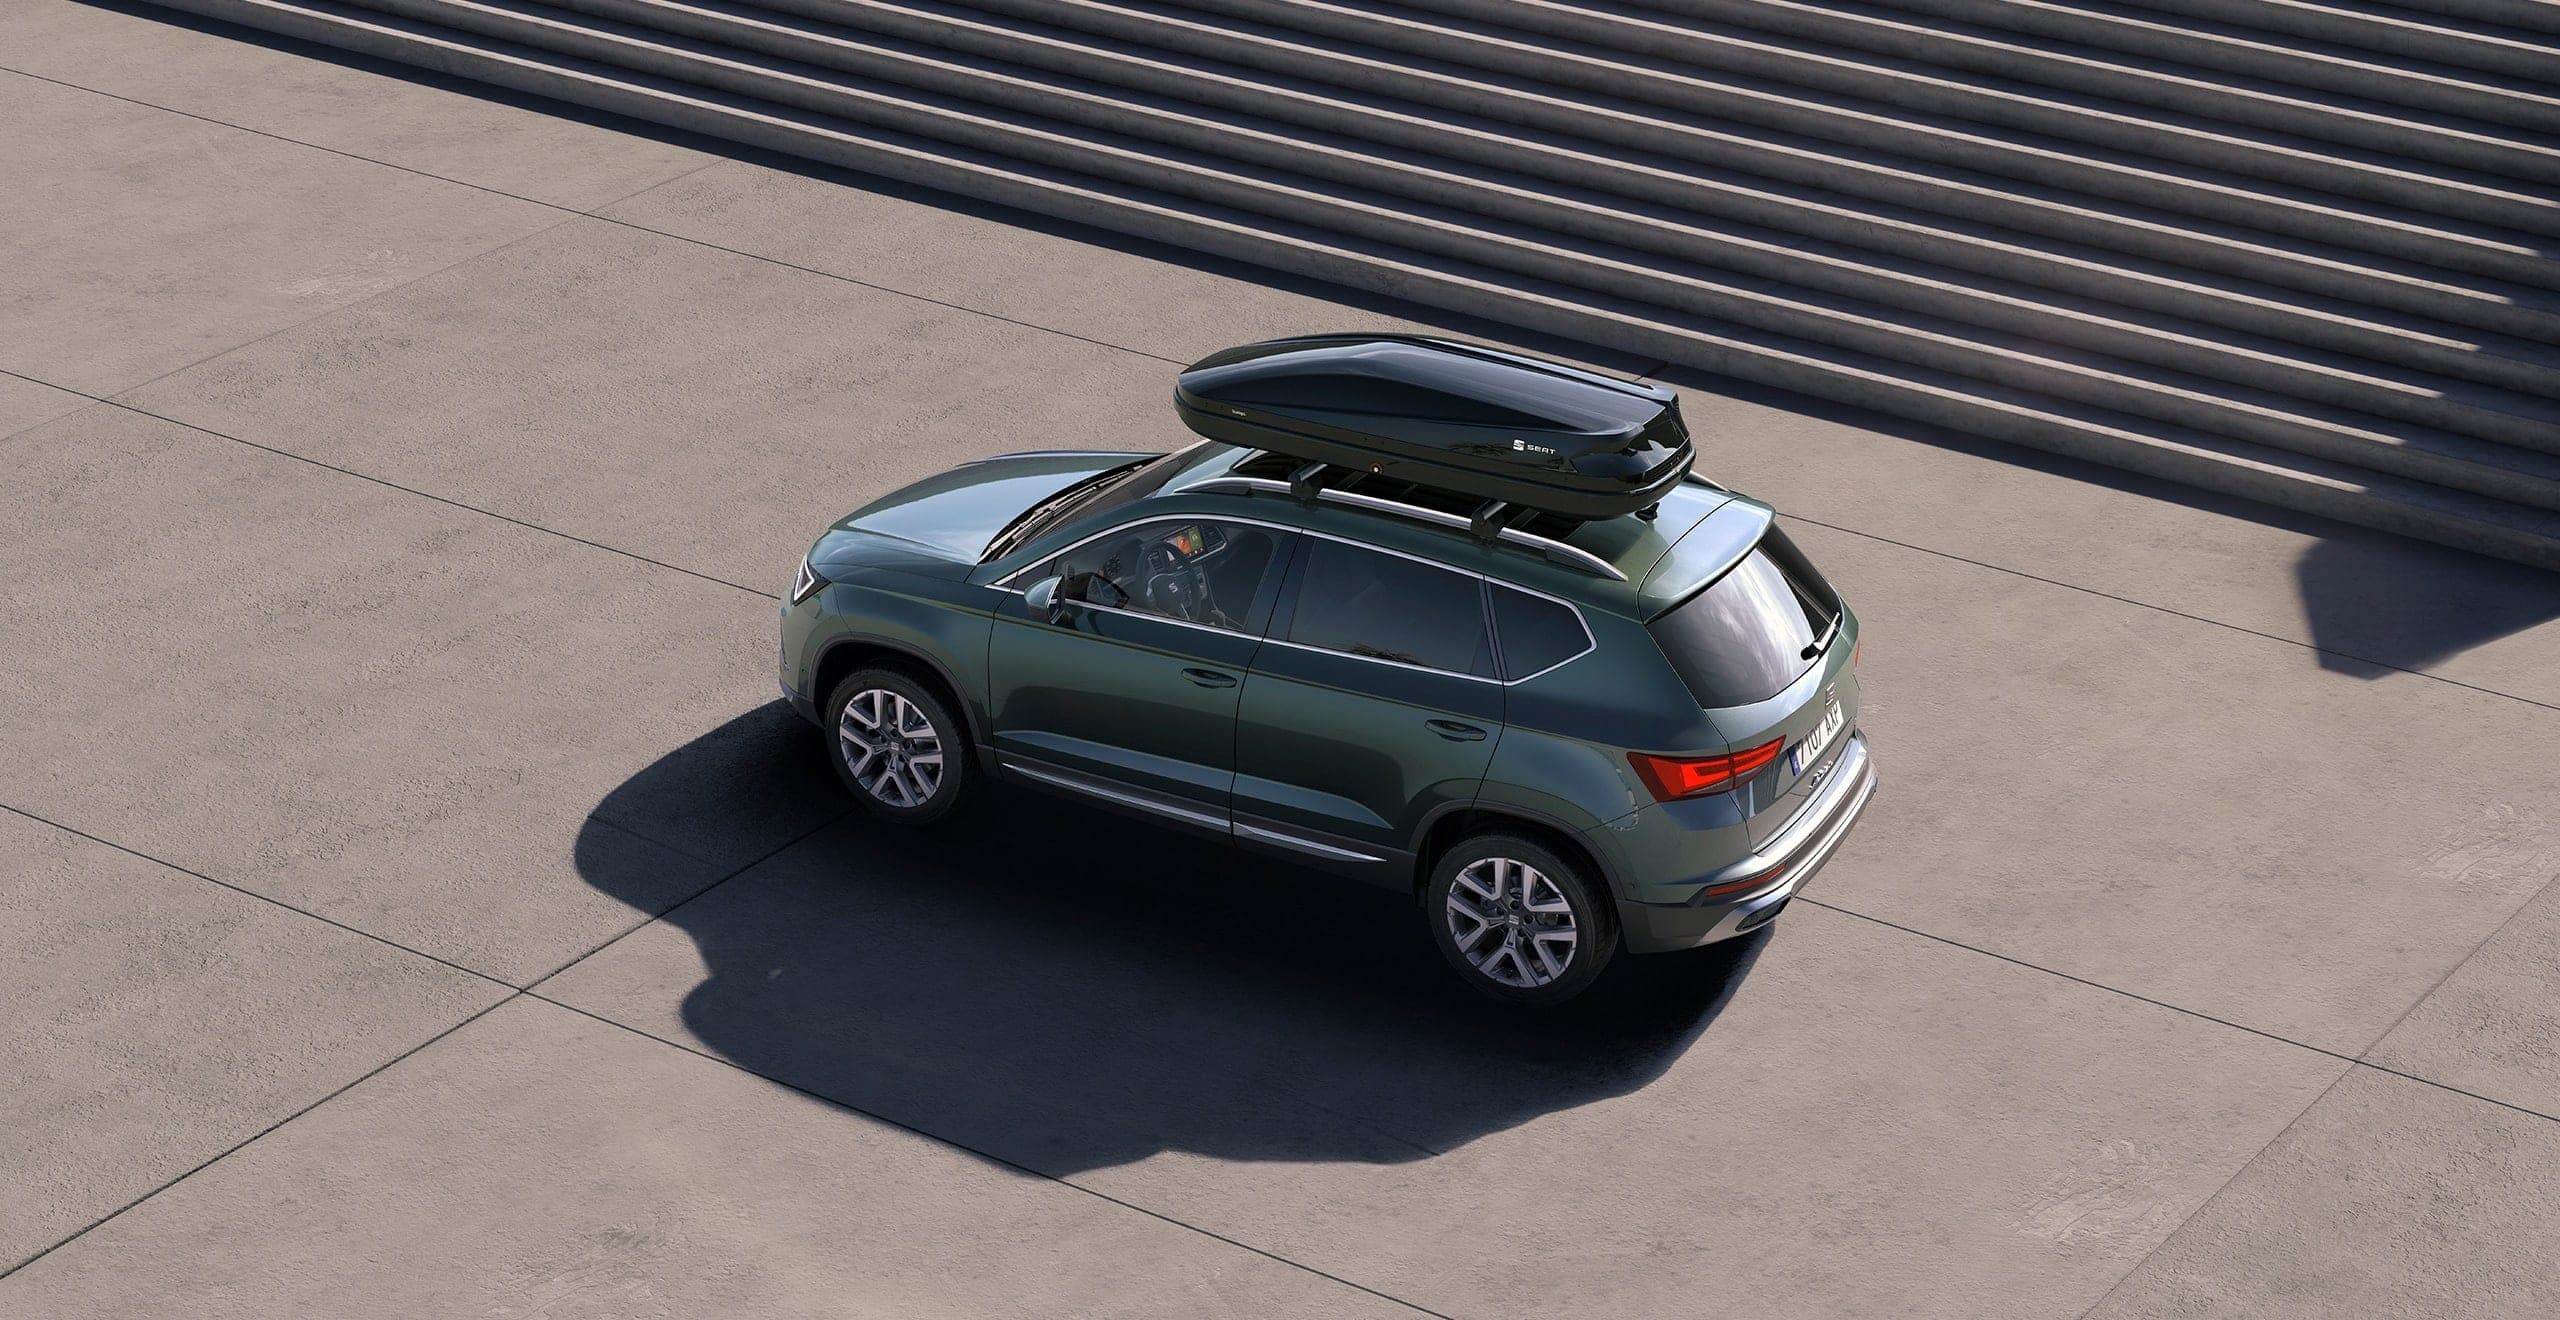 SEAT Ateca Xperience SUV with roof box accesory rear exterior view